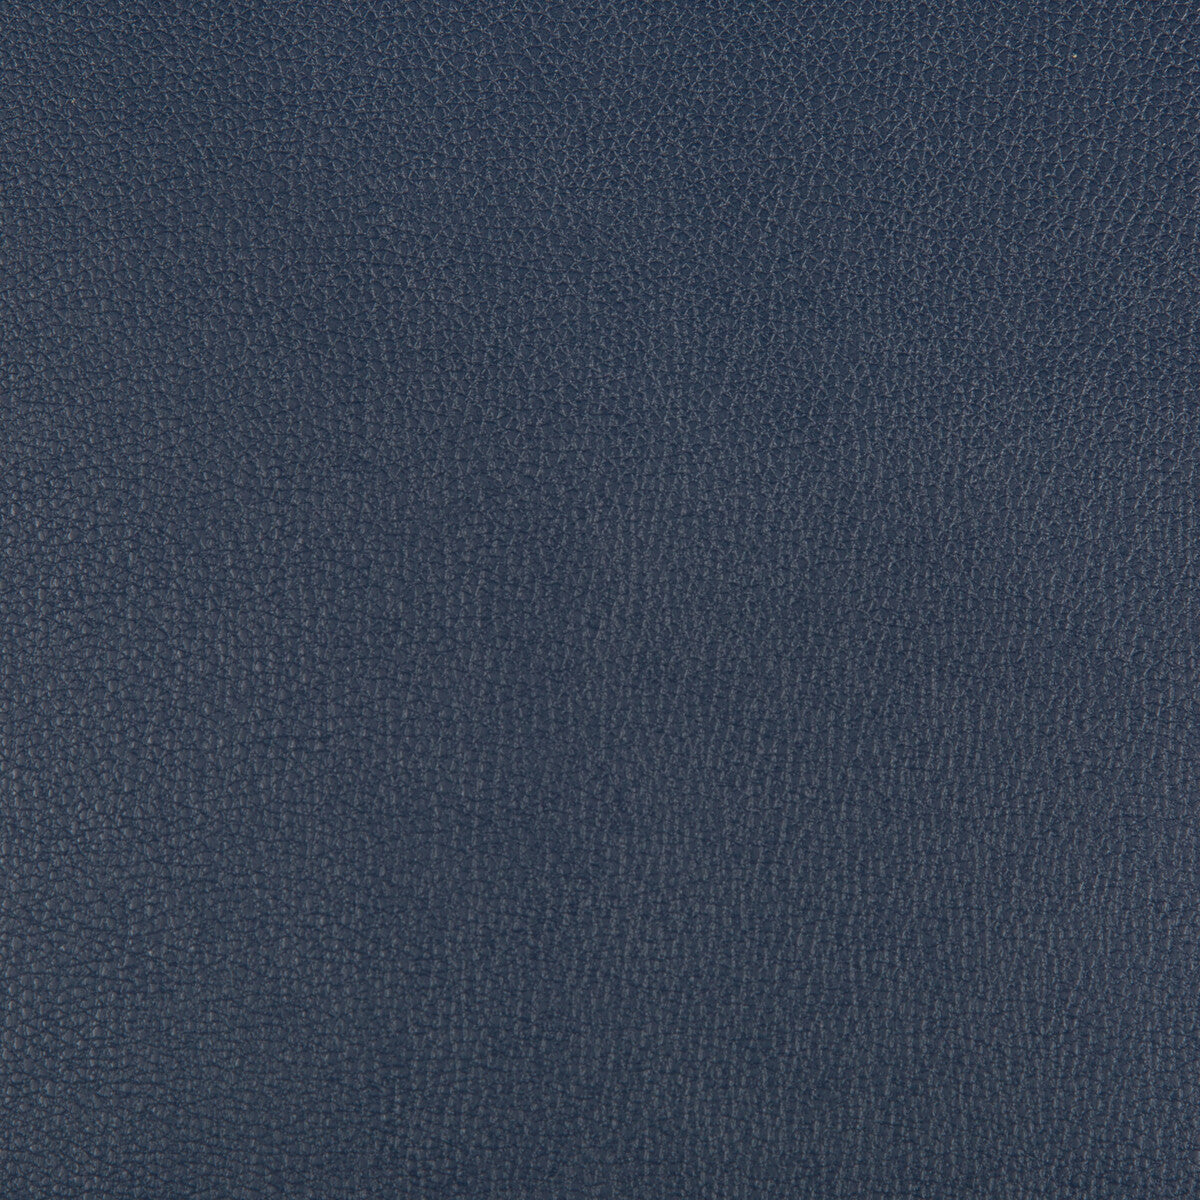 Syrus fabric in midnight color - pattern SYRUS.550.0 - by Kravet Contract